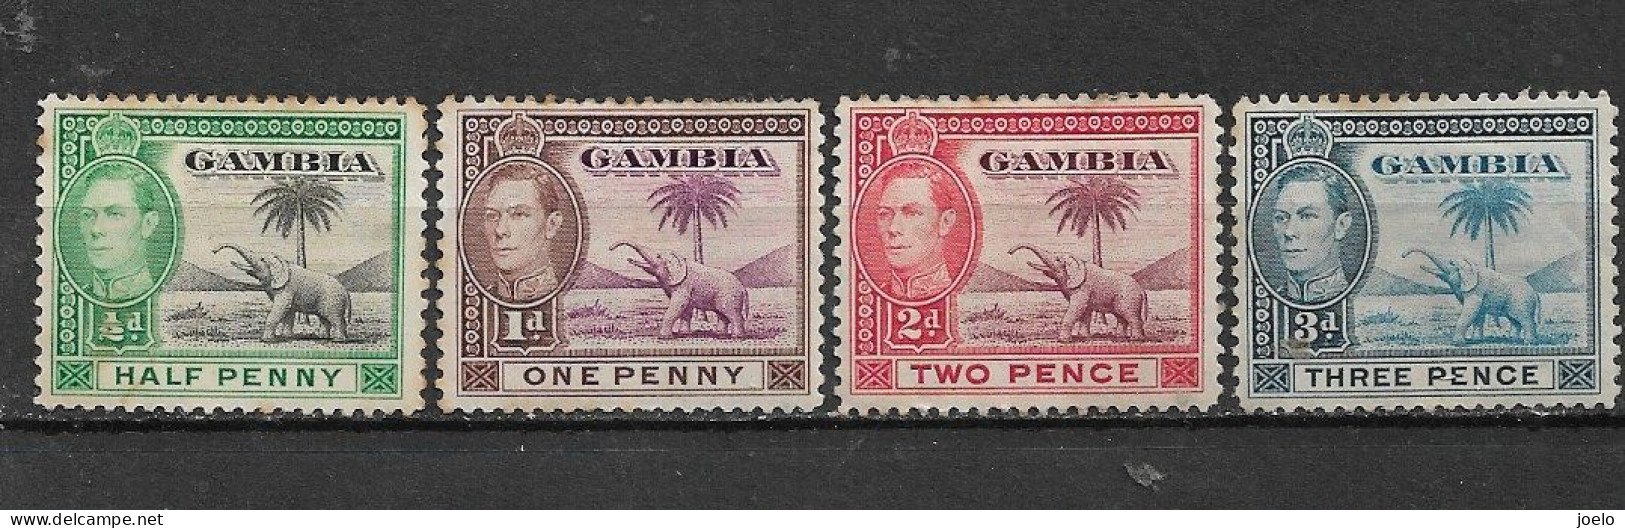 GAMBIA 1938 KGVl DEFINITIVES SHORT SELECTION MH - Gambia (...-1964)